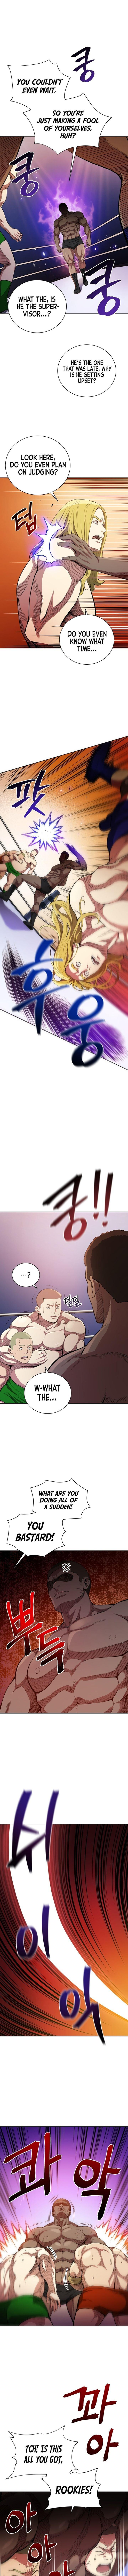 The God of Pro Wrestling - Chapter 2 Page 8